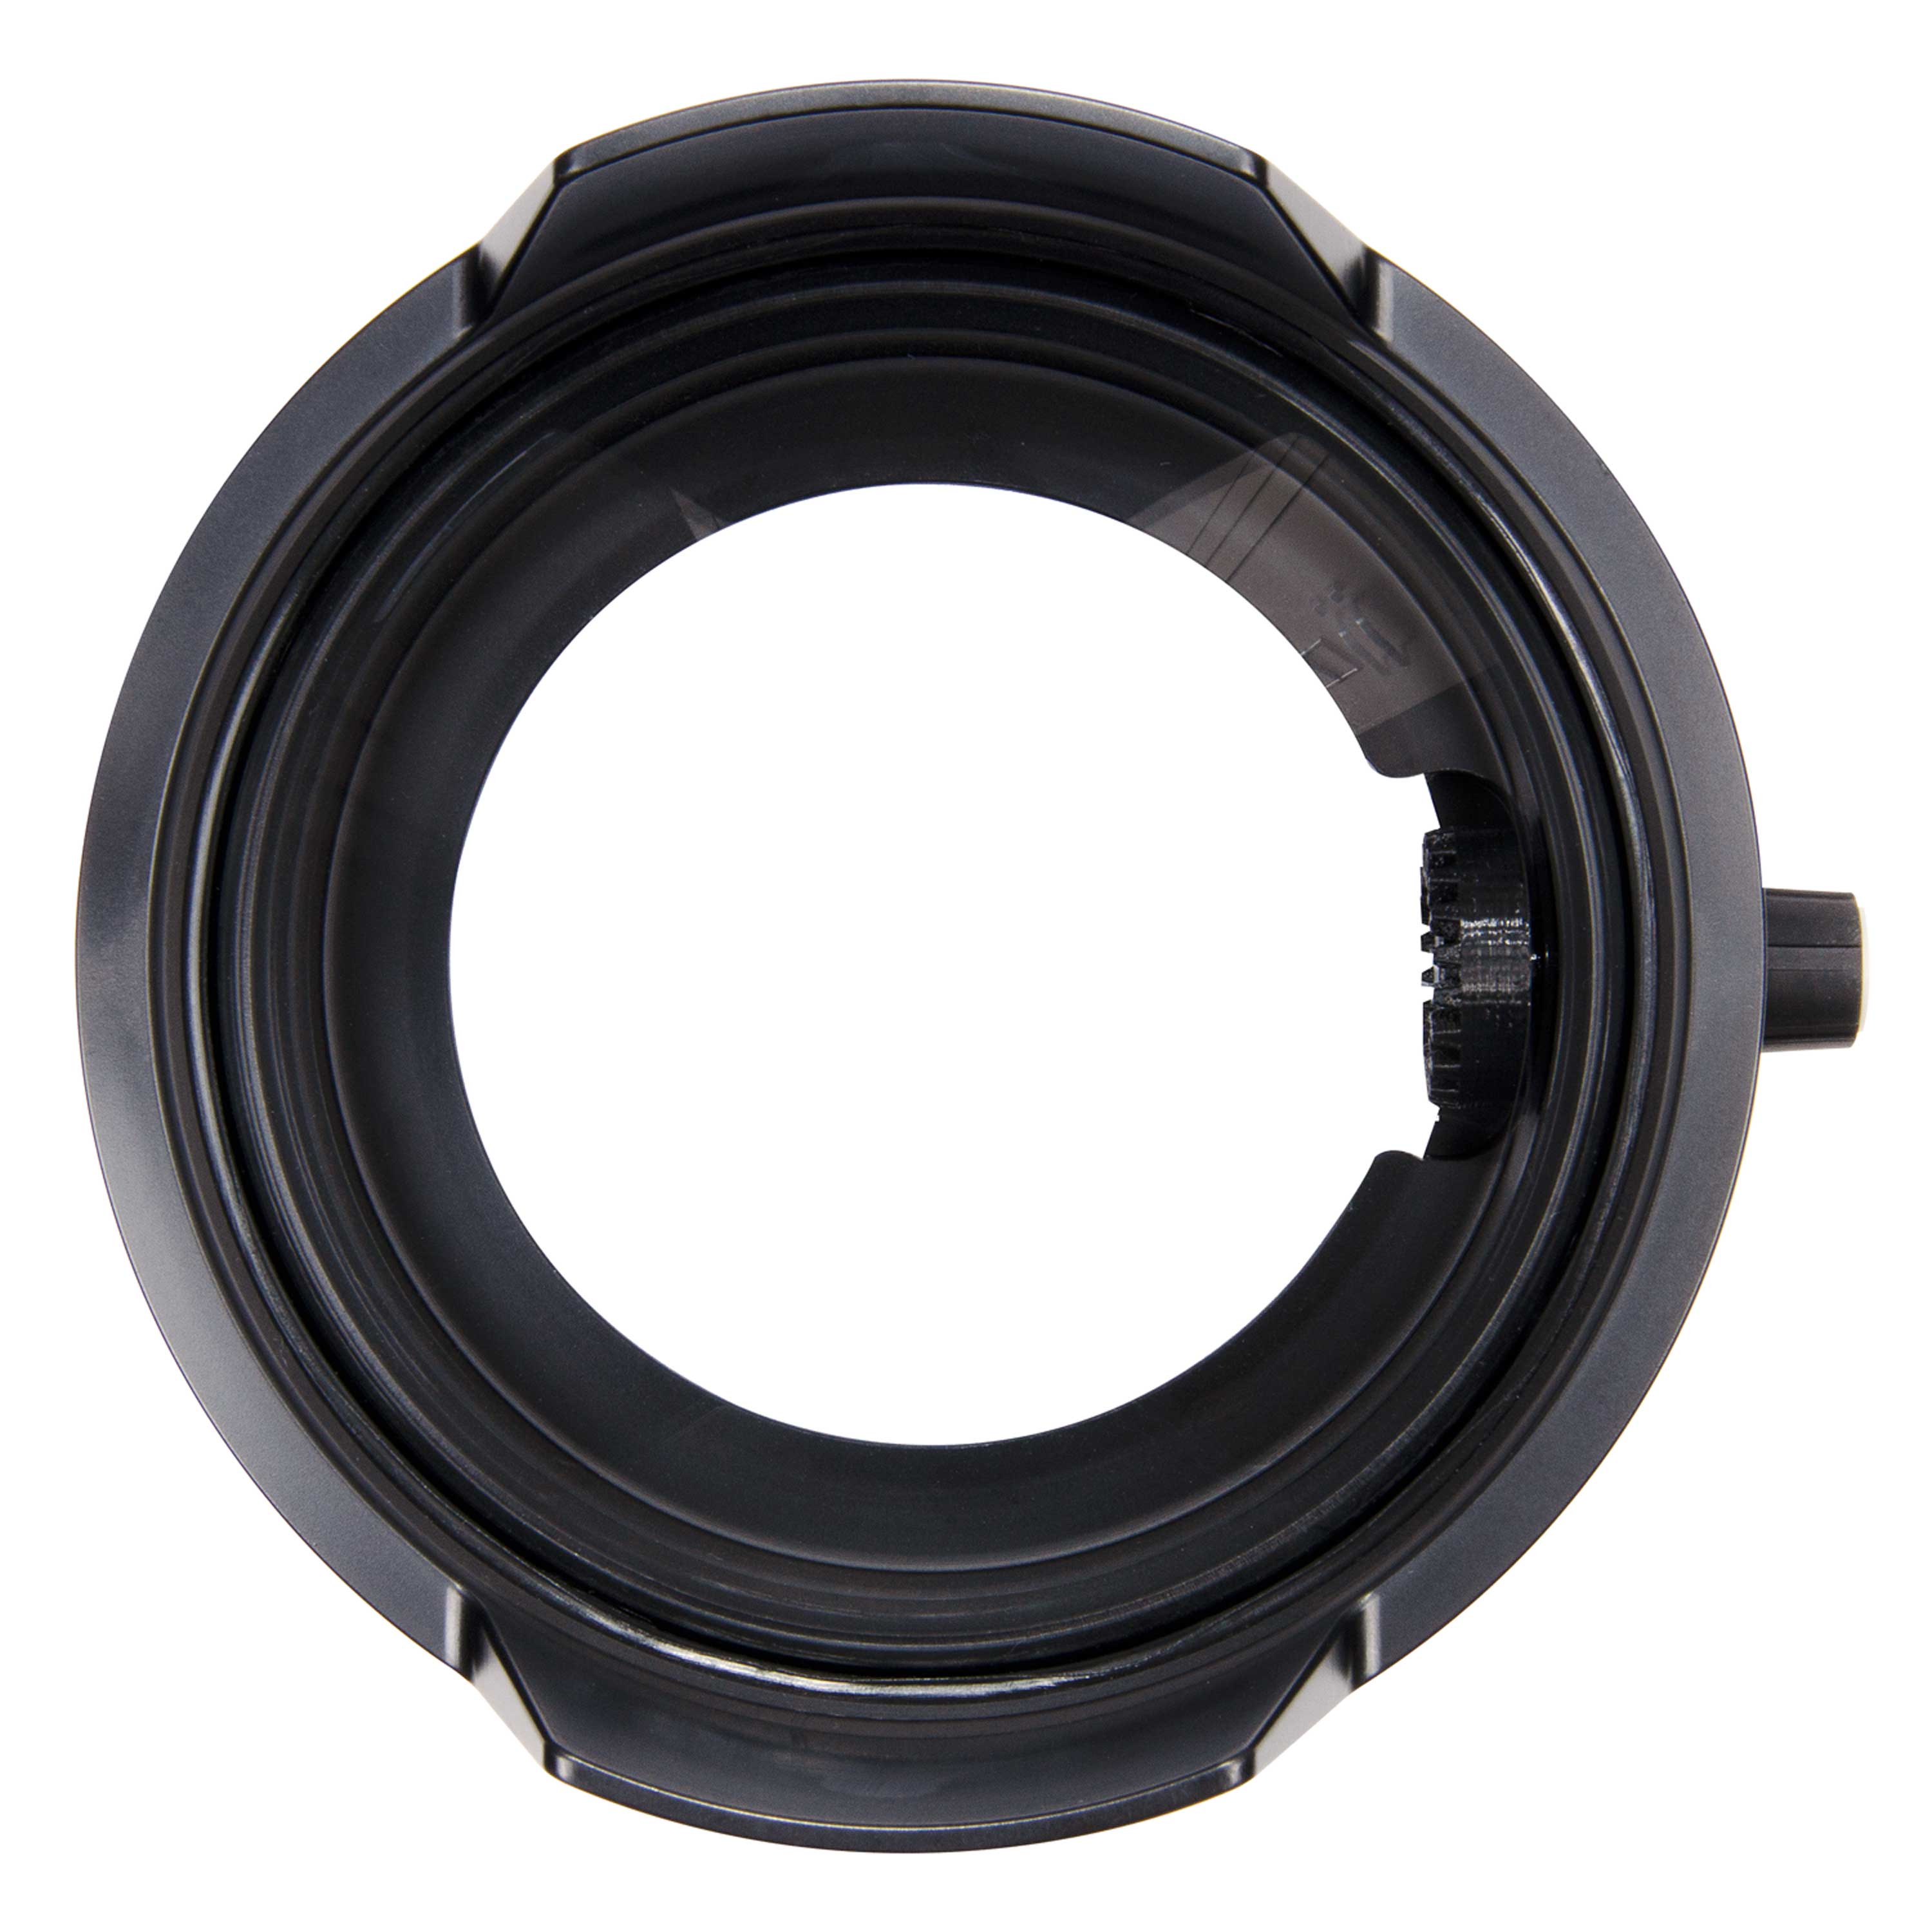 DLM 6 inch Dome Port with Zoom